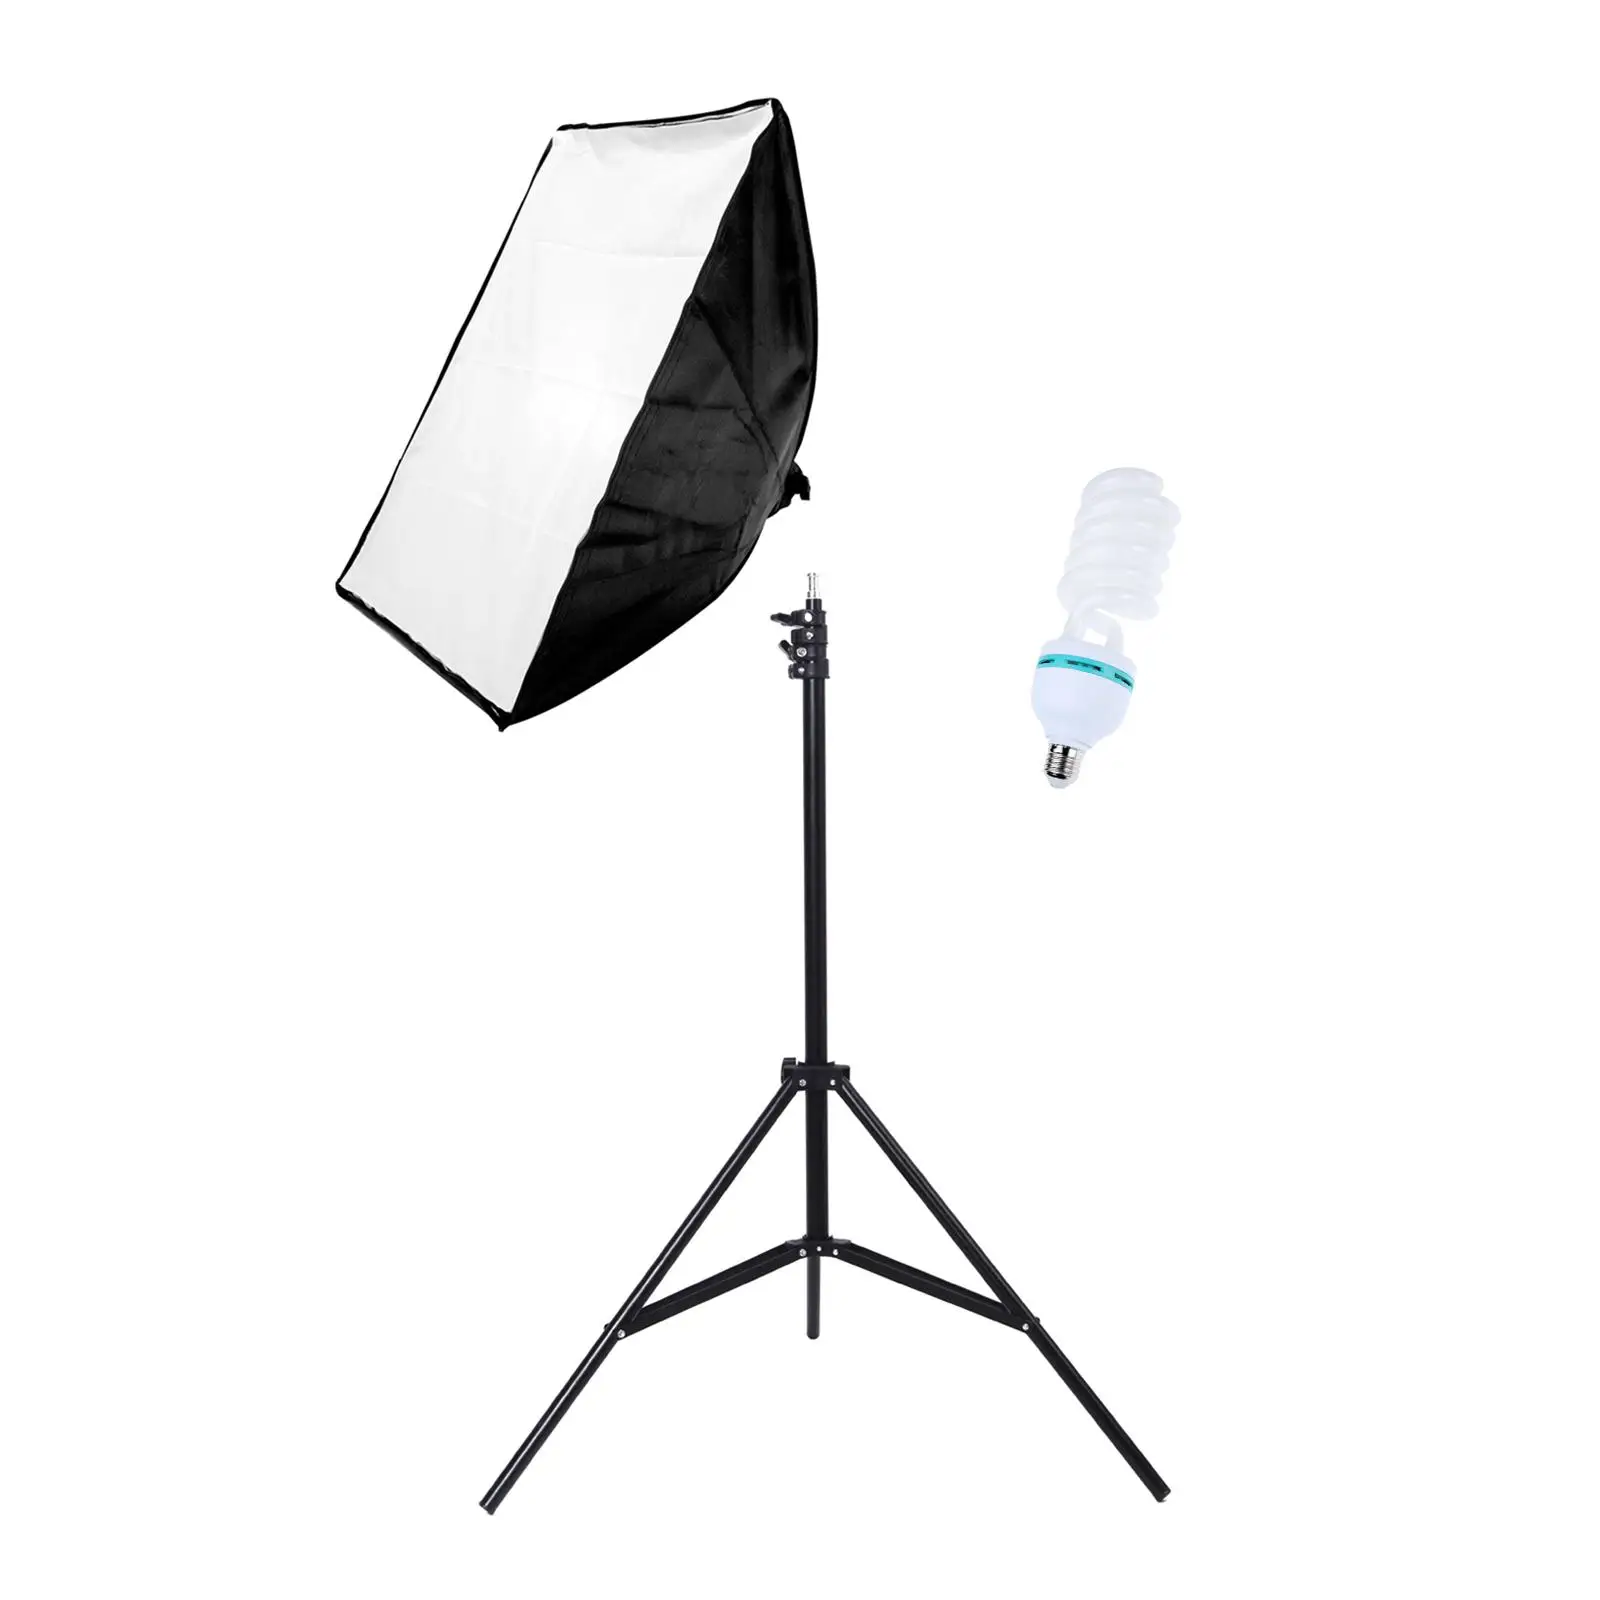 Professional Softbox Lighting Kit Light Tripod Stand Foldable Stable Continuous Photography Lighting Kit for Conference Product